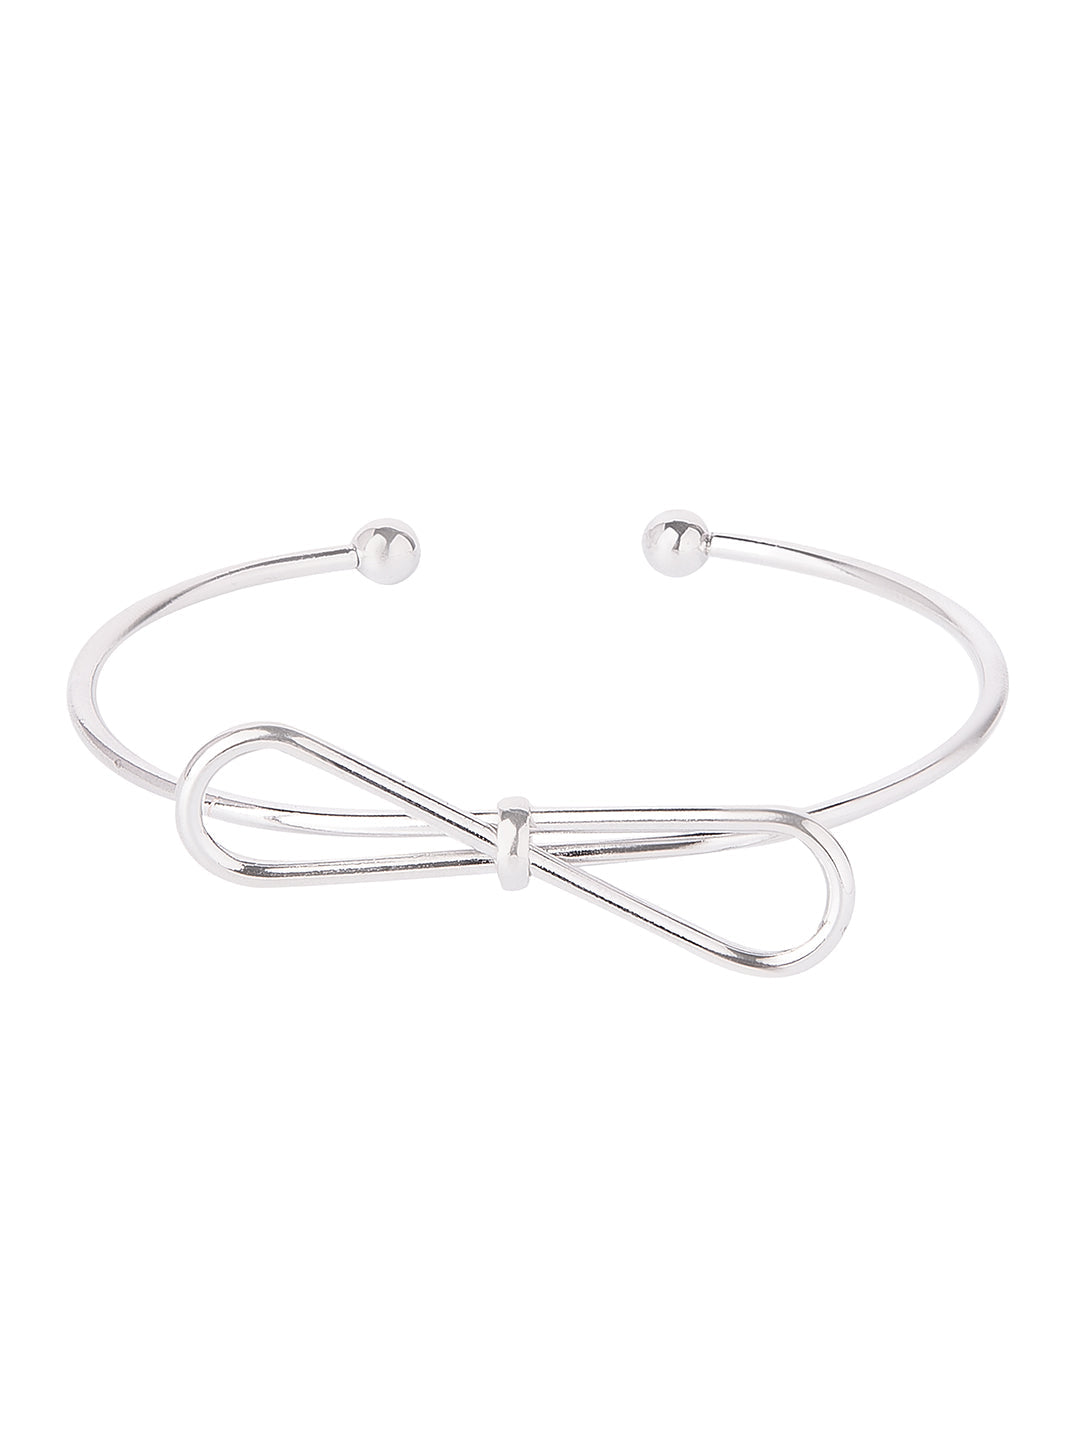 Silver Plated Latest Designer Contemporary Infinity Cuff Bangle Bracelet for Girls & Women (MD_3248_S)